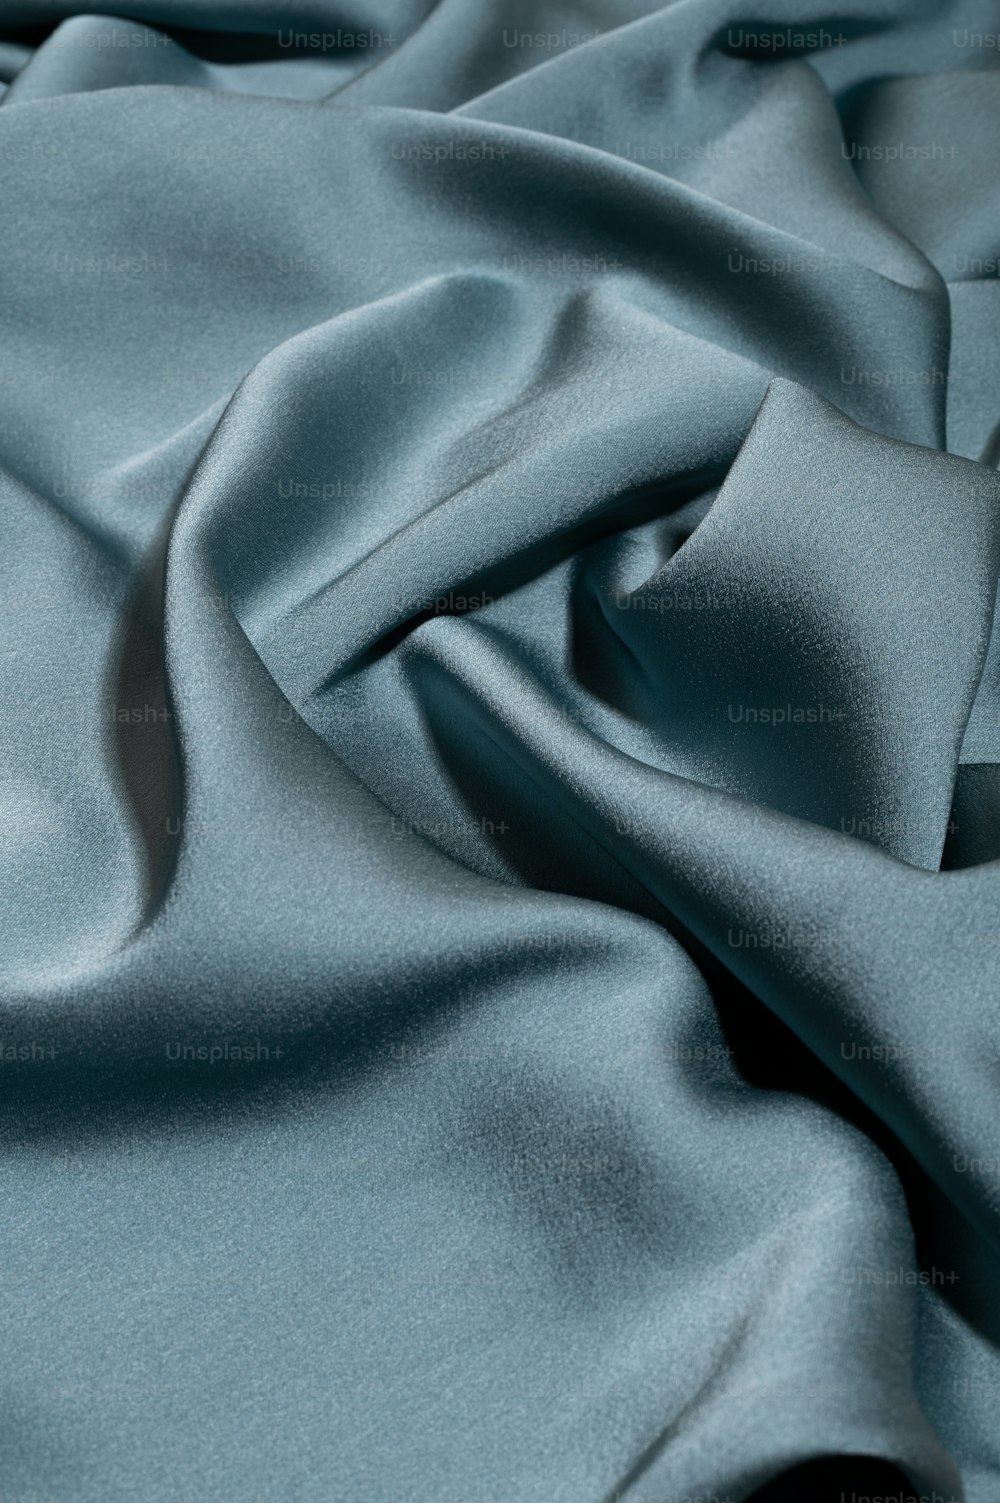 Satin Texture Pictures  Download Free Images on Unsplash